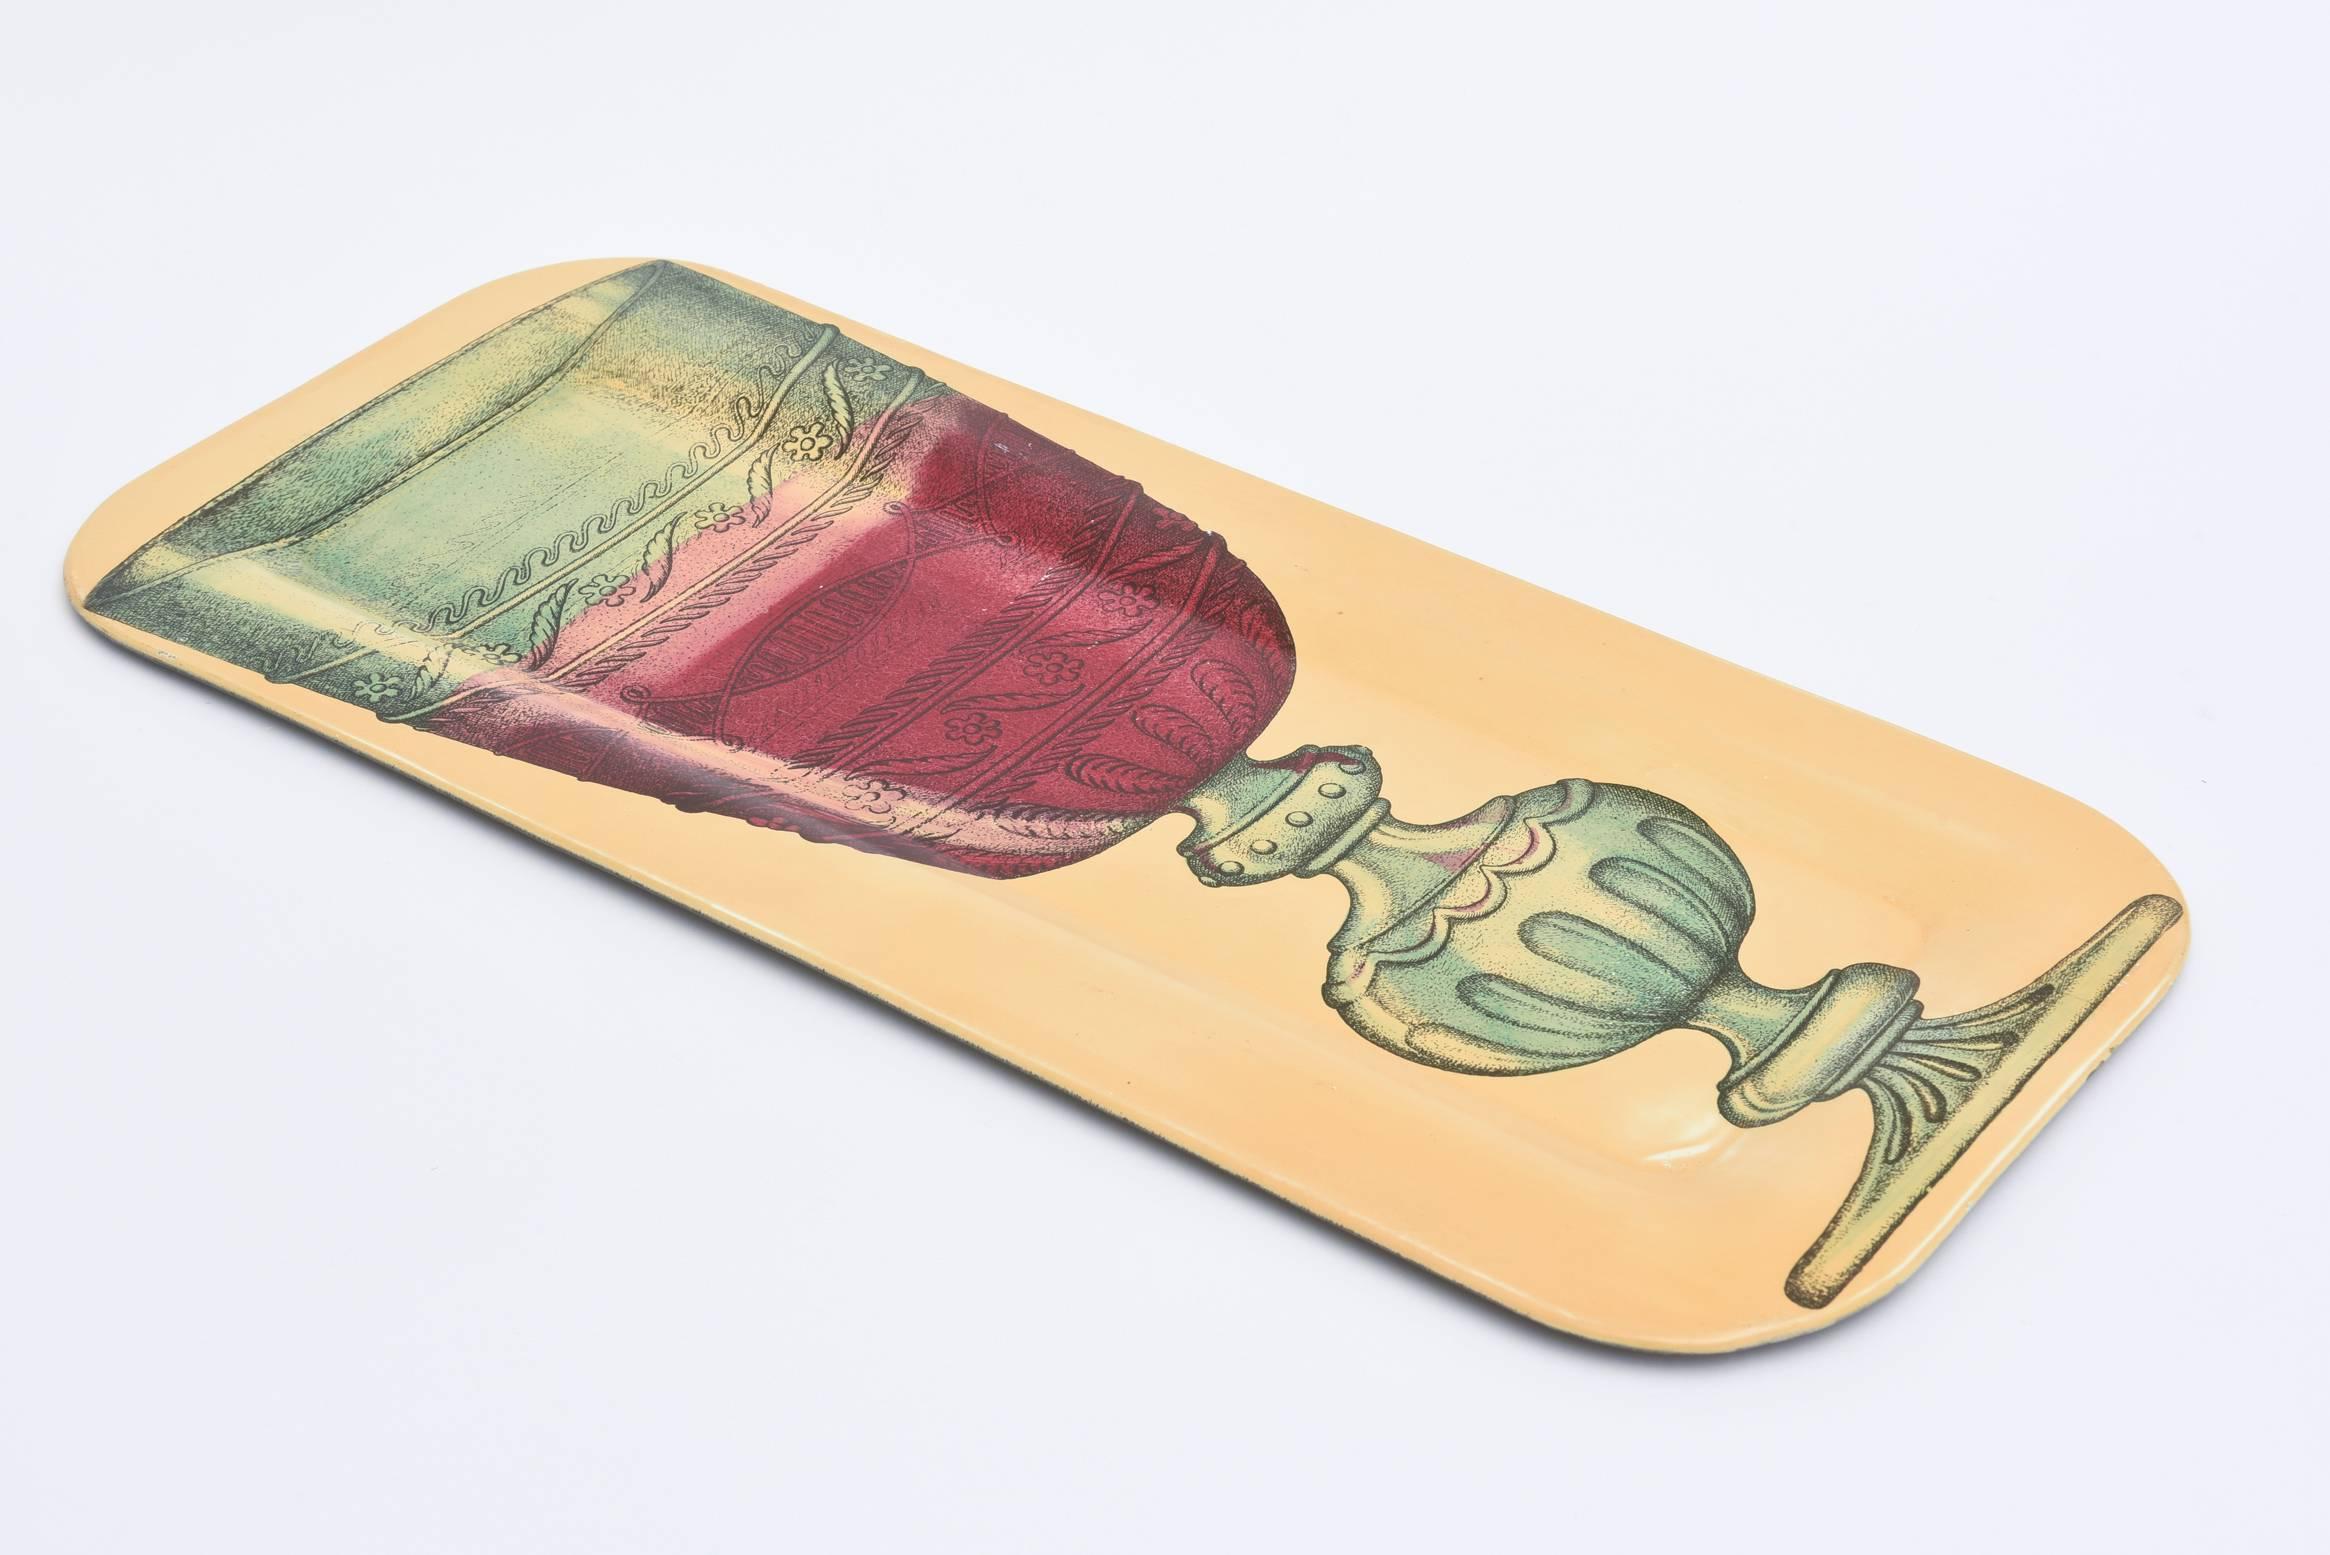 This great and rare serigraphed Italian Mid-Century Modern metal serving tray is the work of Italian artist, dreamer and genius Piero Fornasetti. This is great for barware. This particular image of this rectangle tray is rarer. It is from the 1950s.